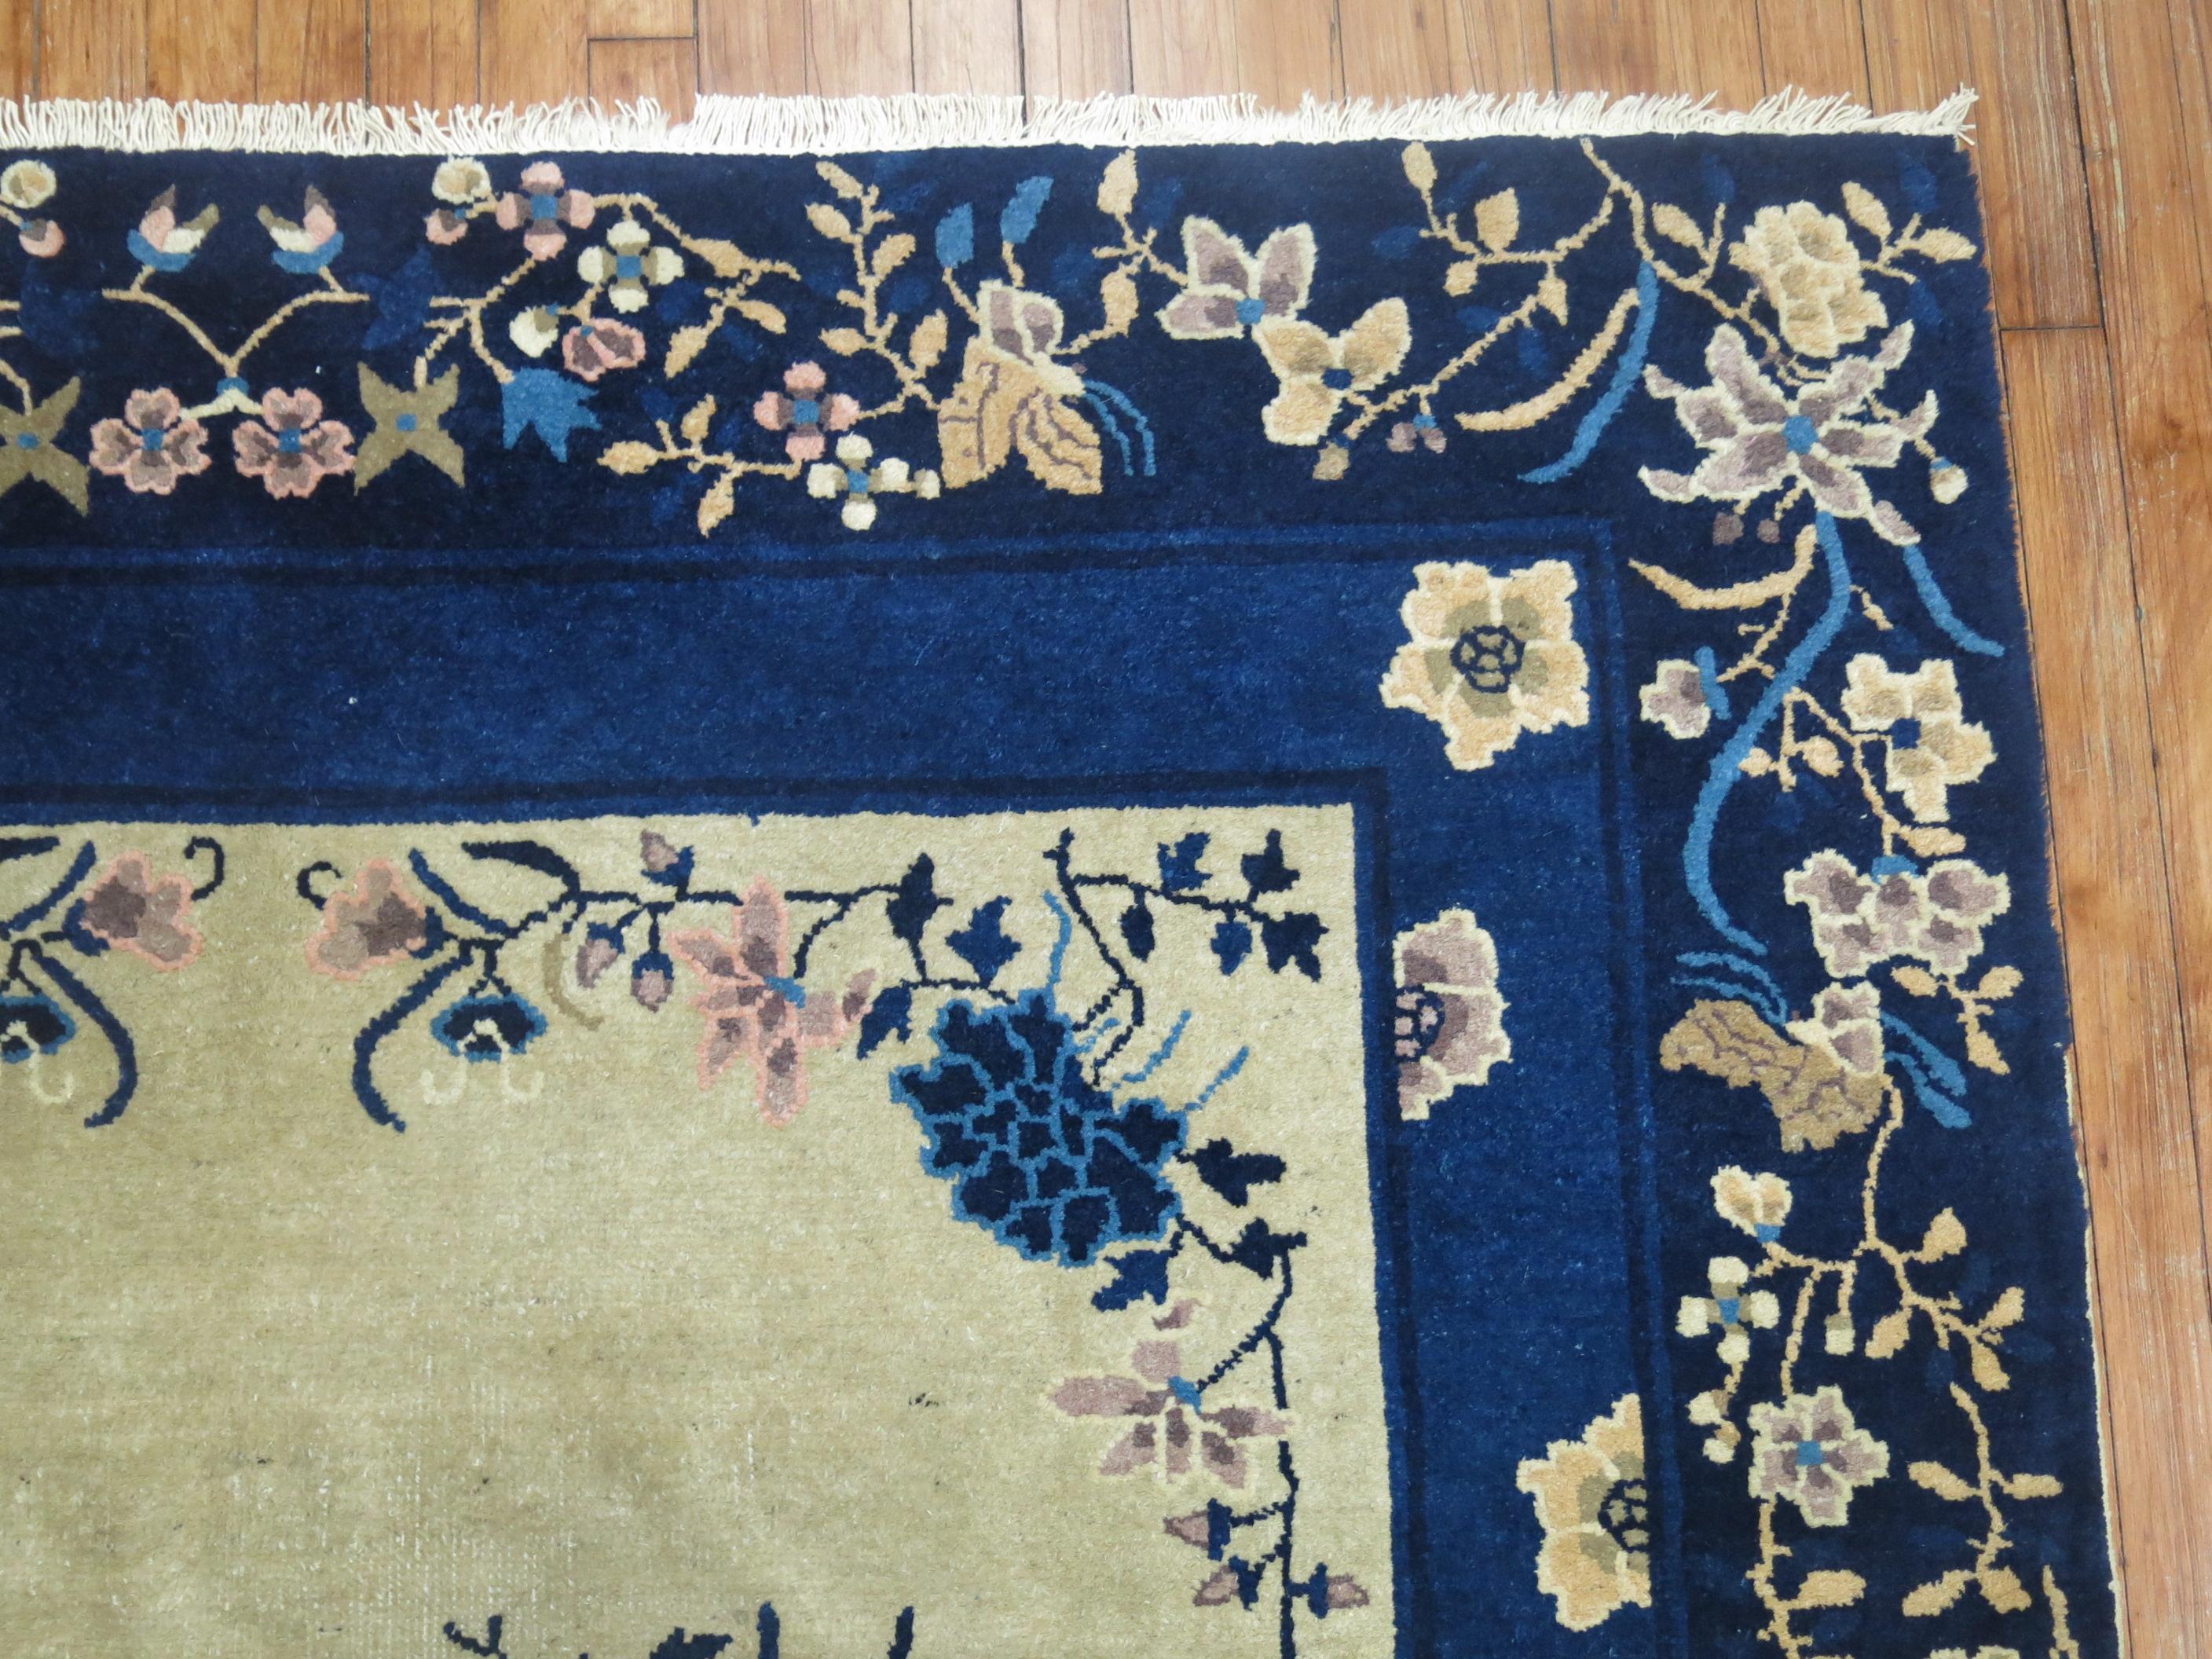 An early 20th century floral Chinese rug in beige and navy Blue

6'2'' x 9'

Peking rugs consist of designs that are simpler and asymmetrical, often tending toward modern western Art Deco taste.